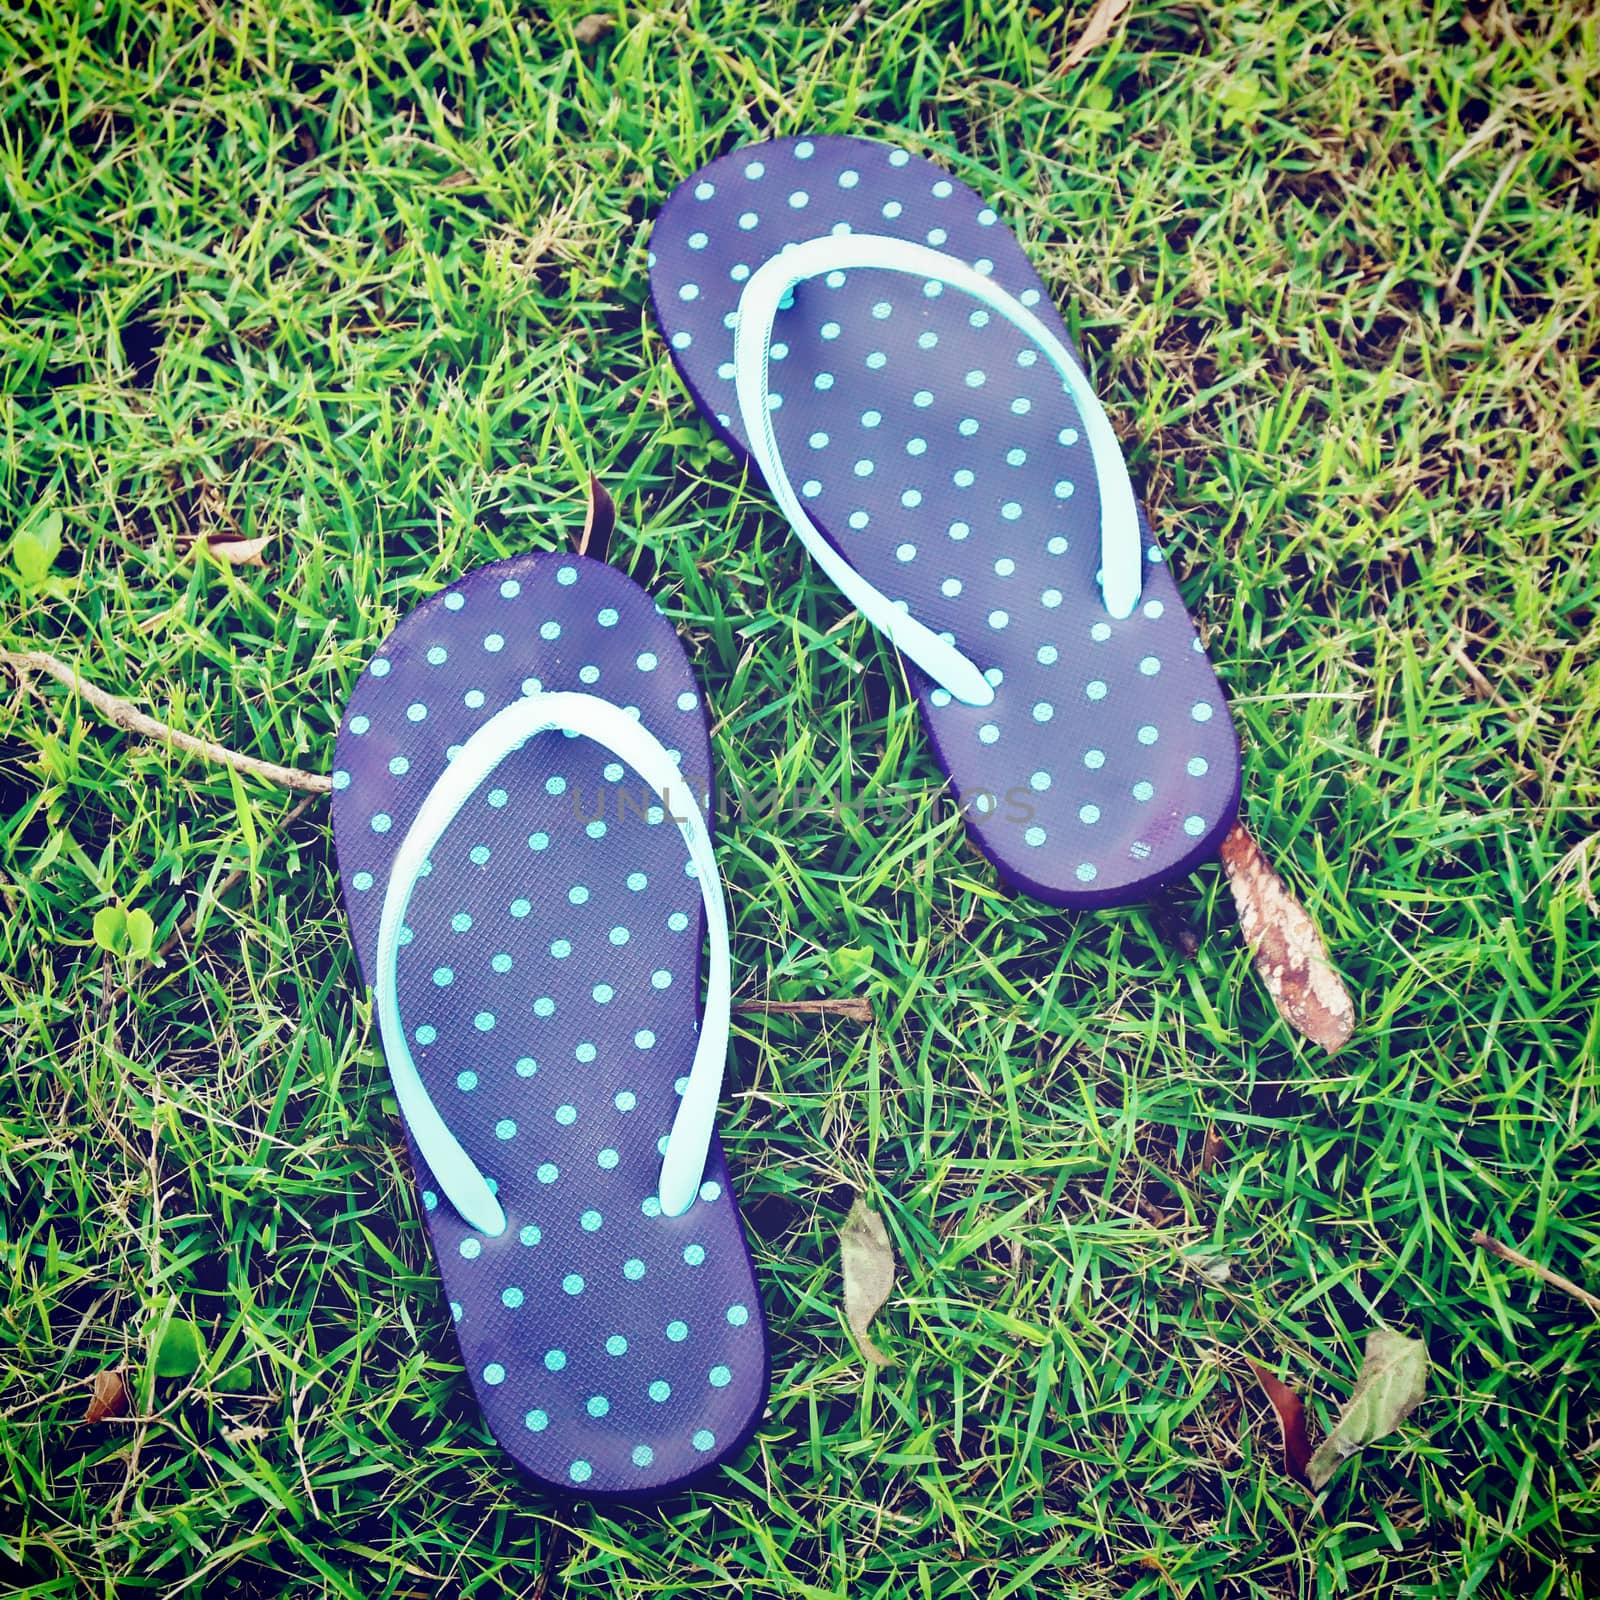 blue polka dot sandal on grass with retro filter effect by nuchylee